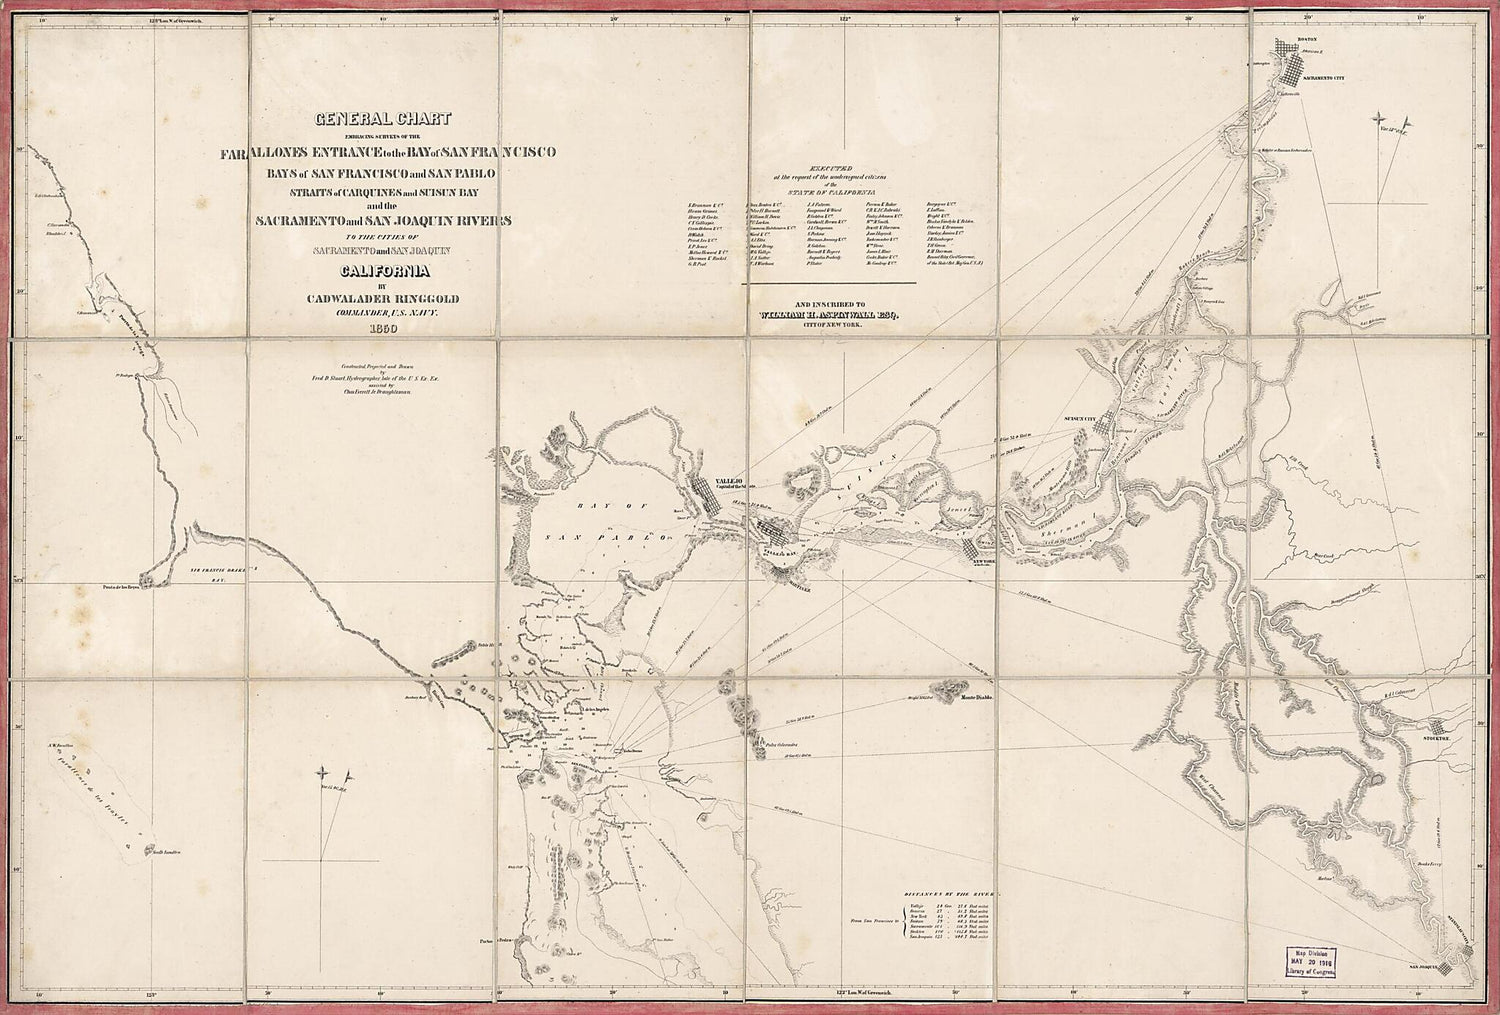 This old map of General Chart Embracing Surveys of the Farallones Entrance to the Bay of San Francisco, Bays of San Francisco and San Pablo, Straits of Carquines and Suisun Bay, and the Sacramento and San Joaquin Rivers to the Cities of Sacramento and Sa